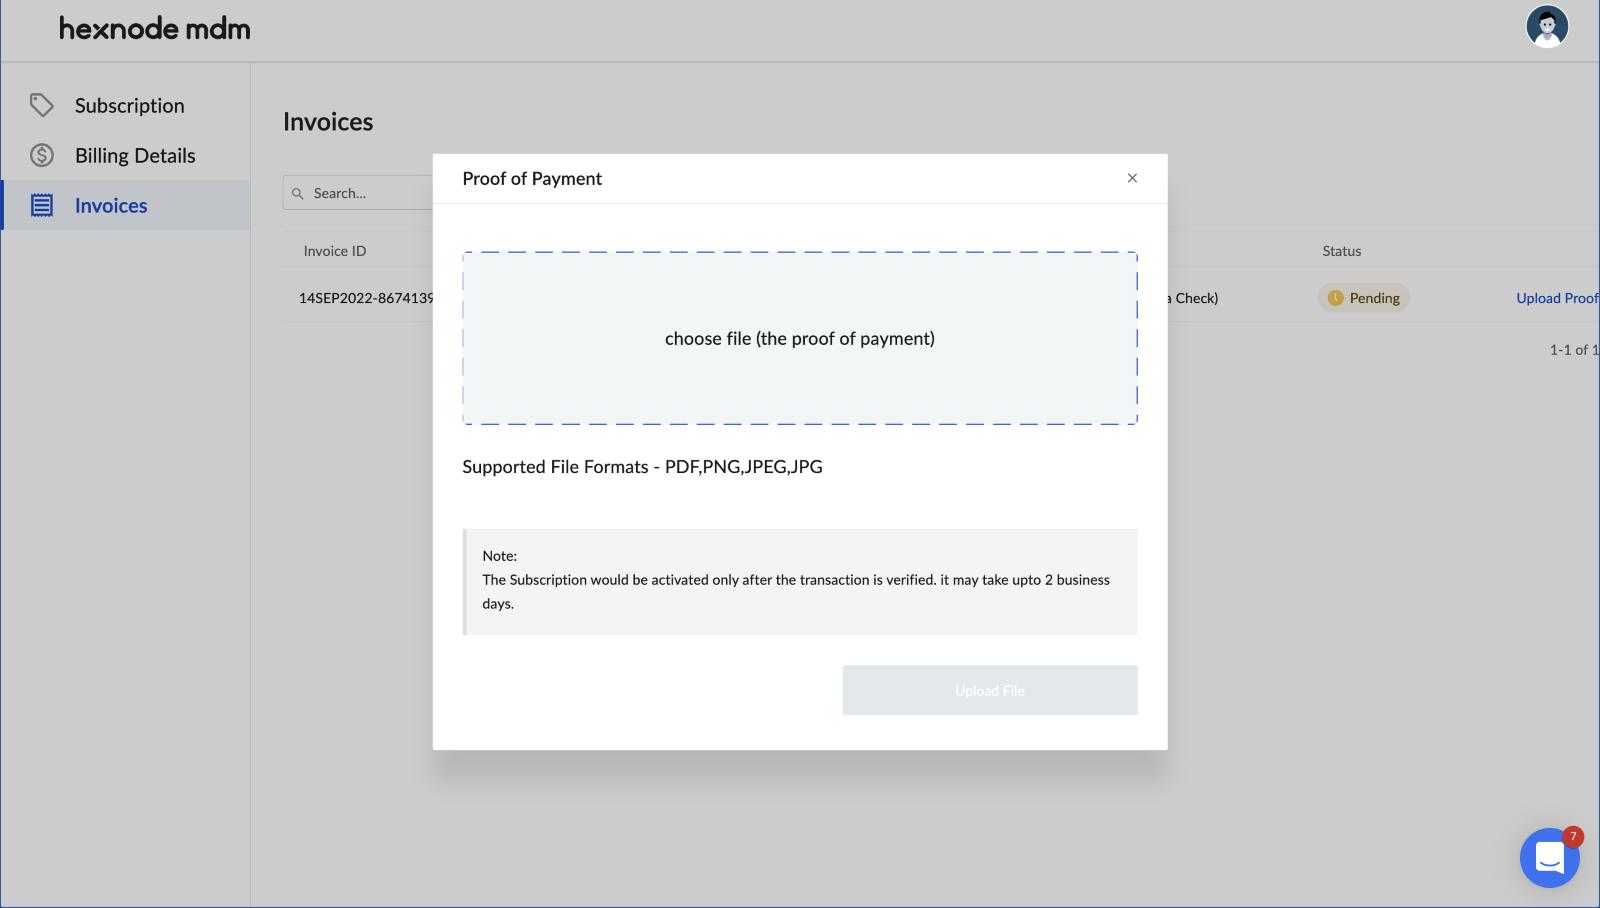 Uploading payment proof in the Hexnode portal.